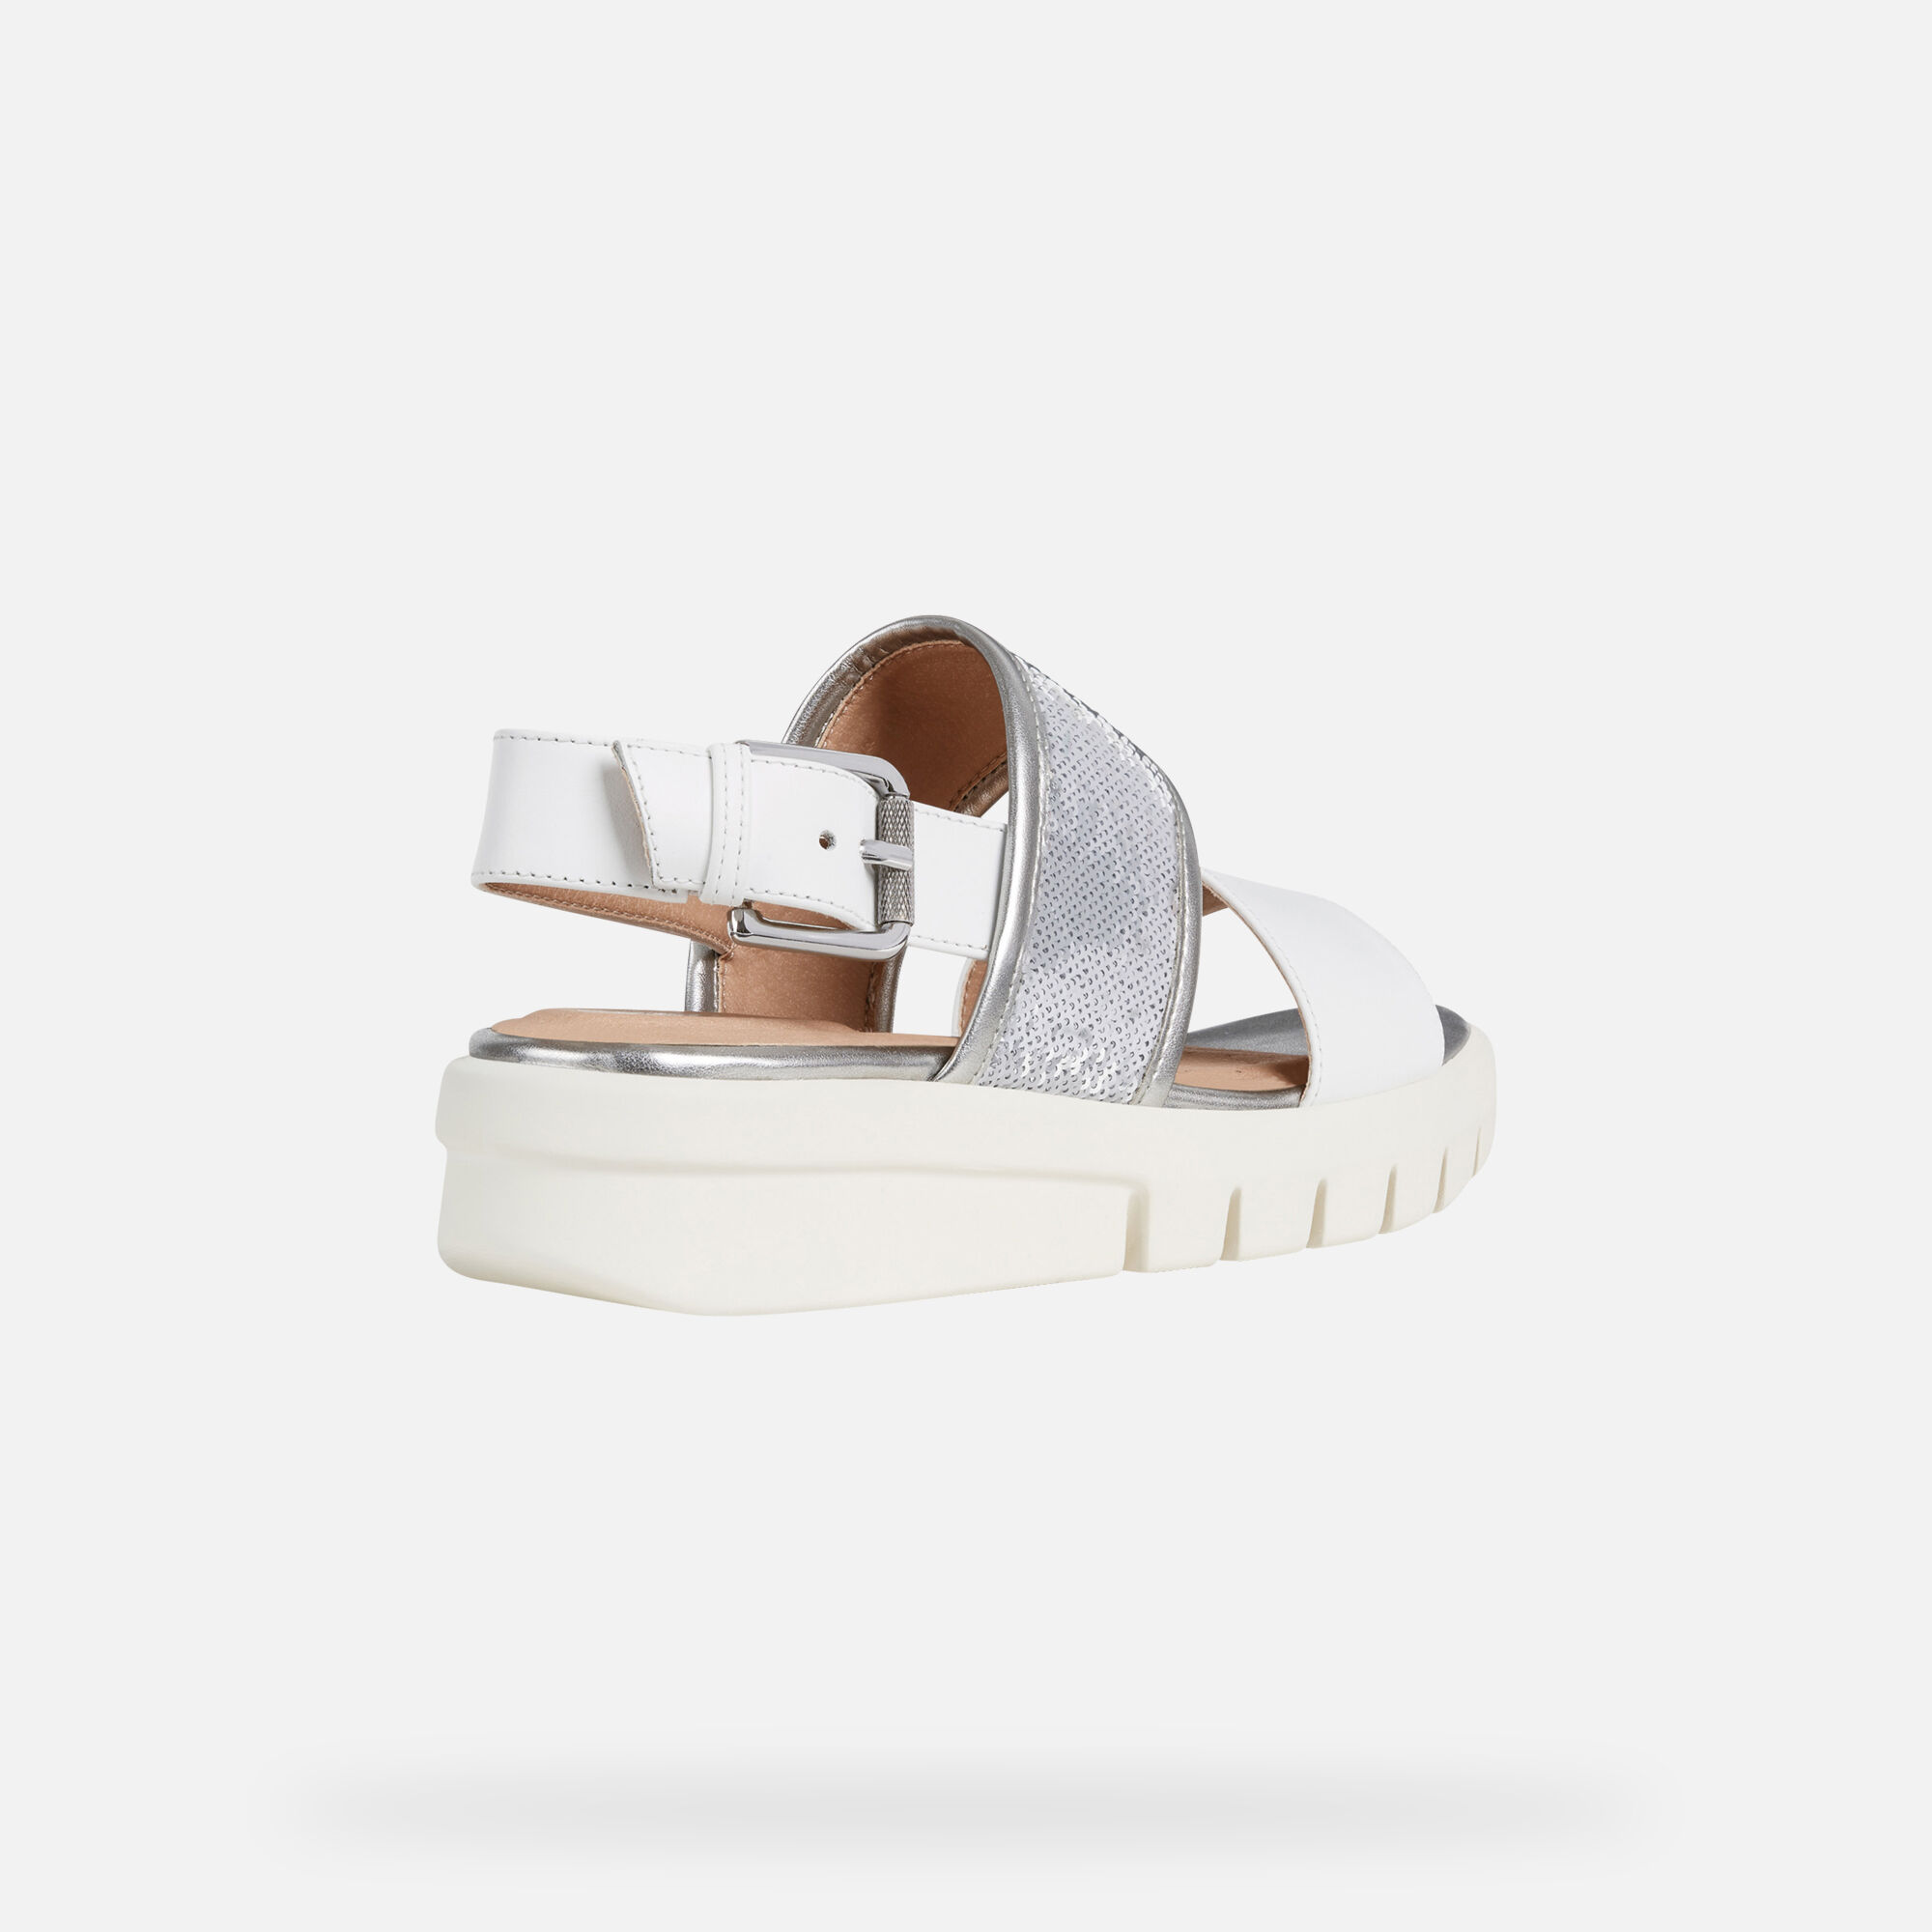 Geox D WIMBLEY SANDAL: White and Silver 